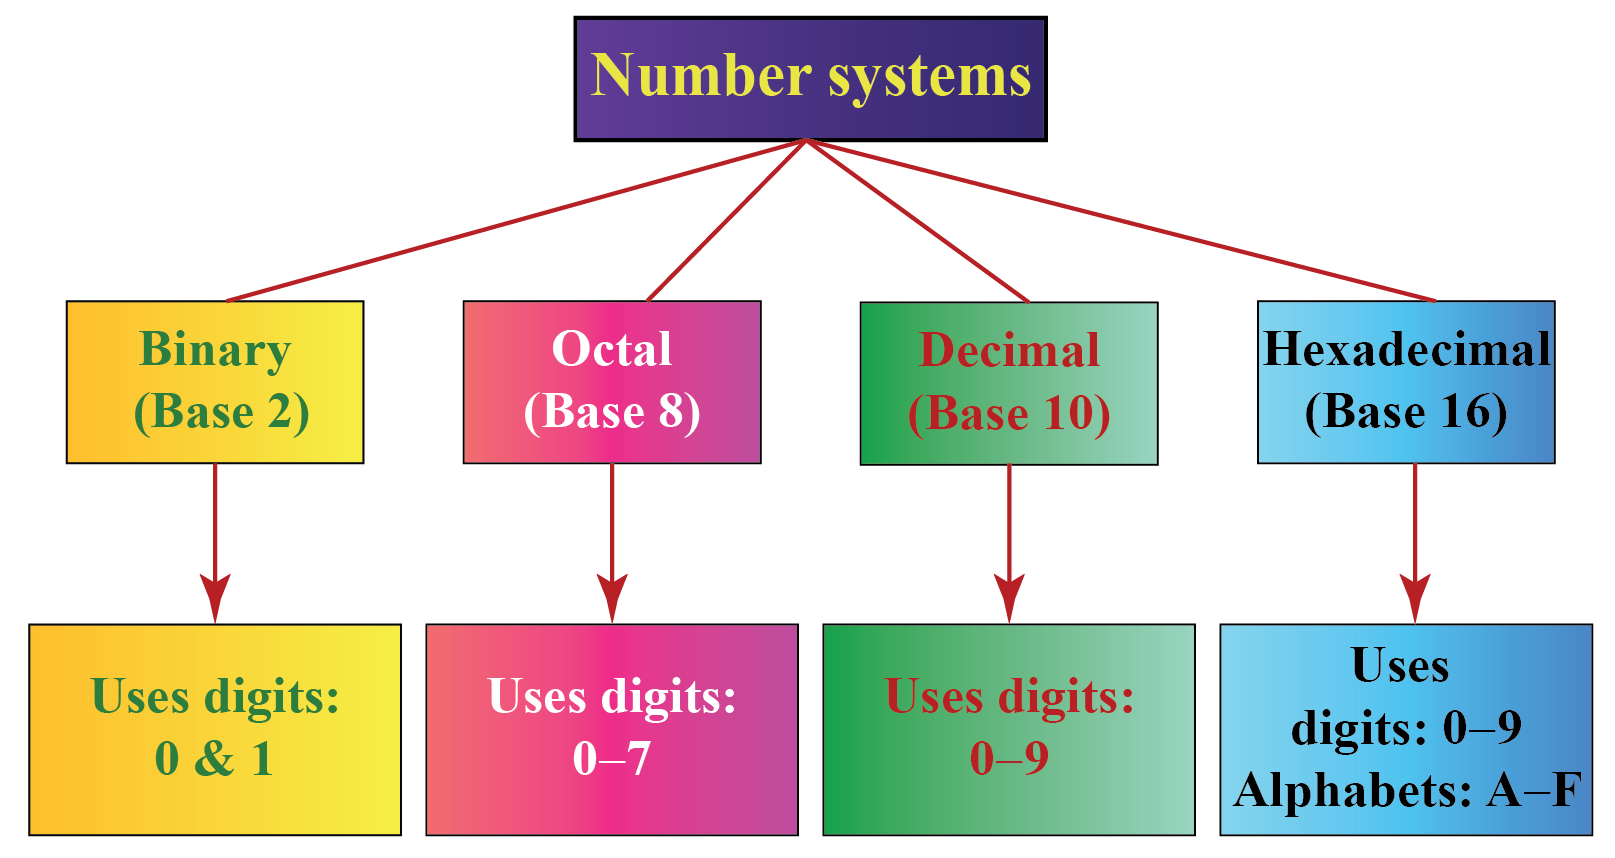 write an essay on why computers use number systems